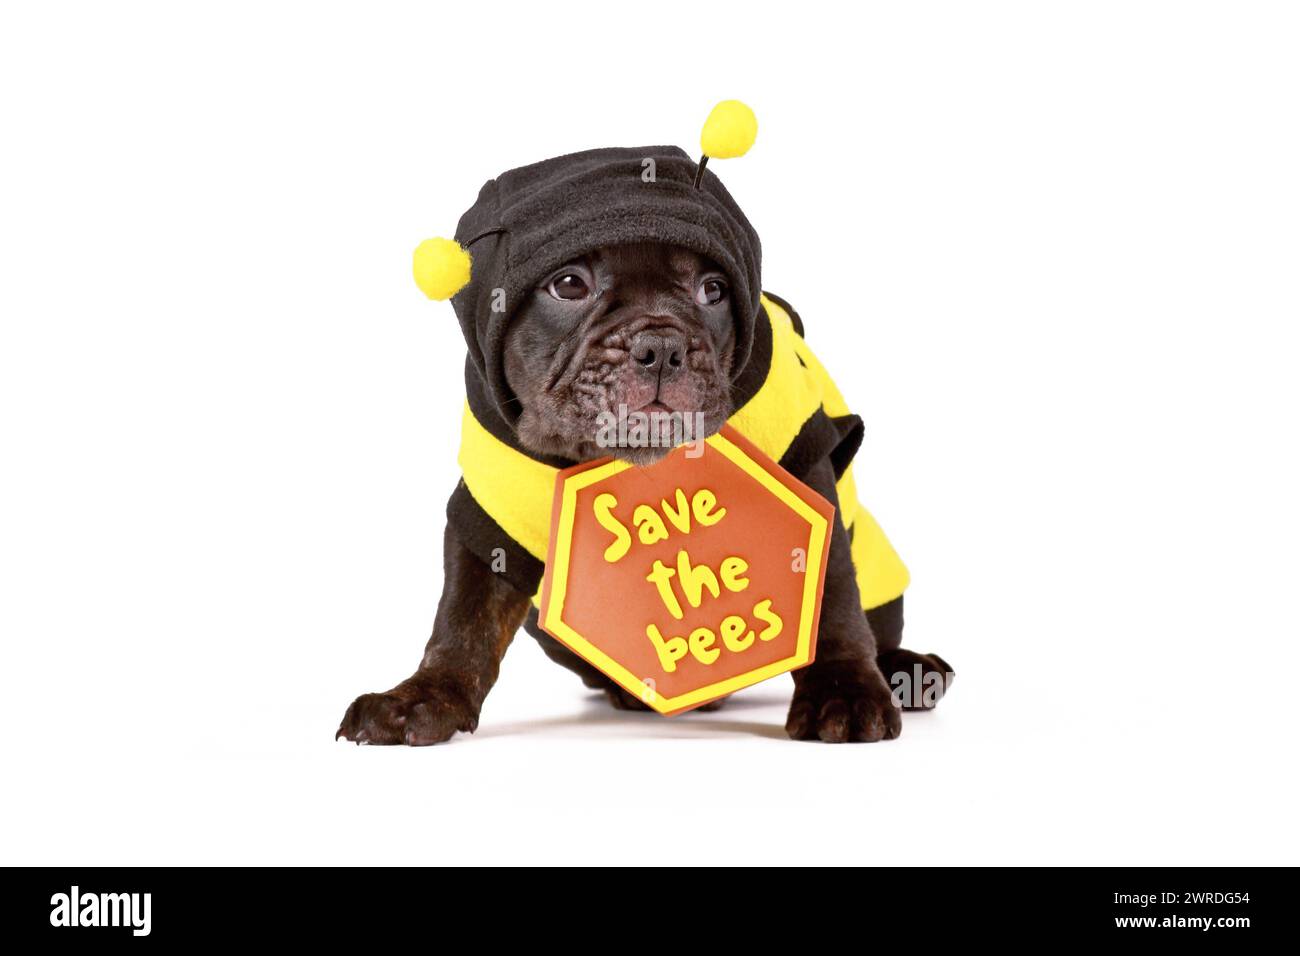 French Bulldog dog puppy dressed up with bee costume and 'Save the bees' sign on white background Stock Photo